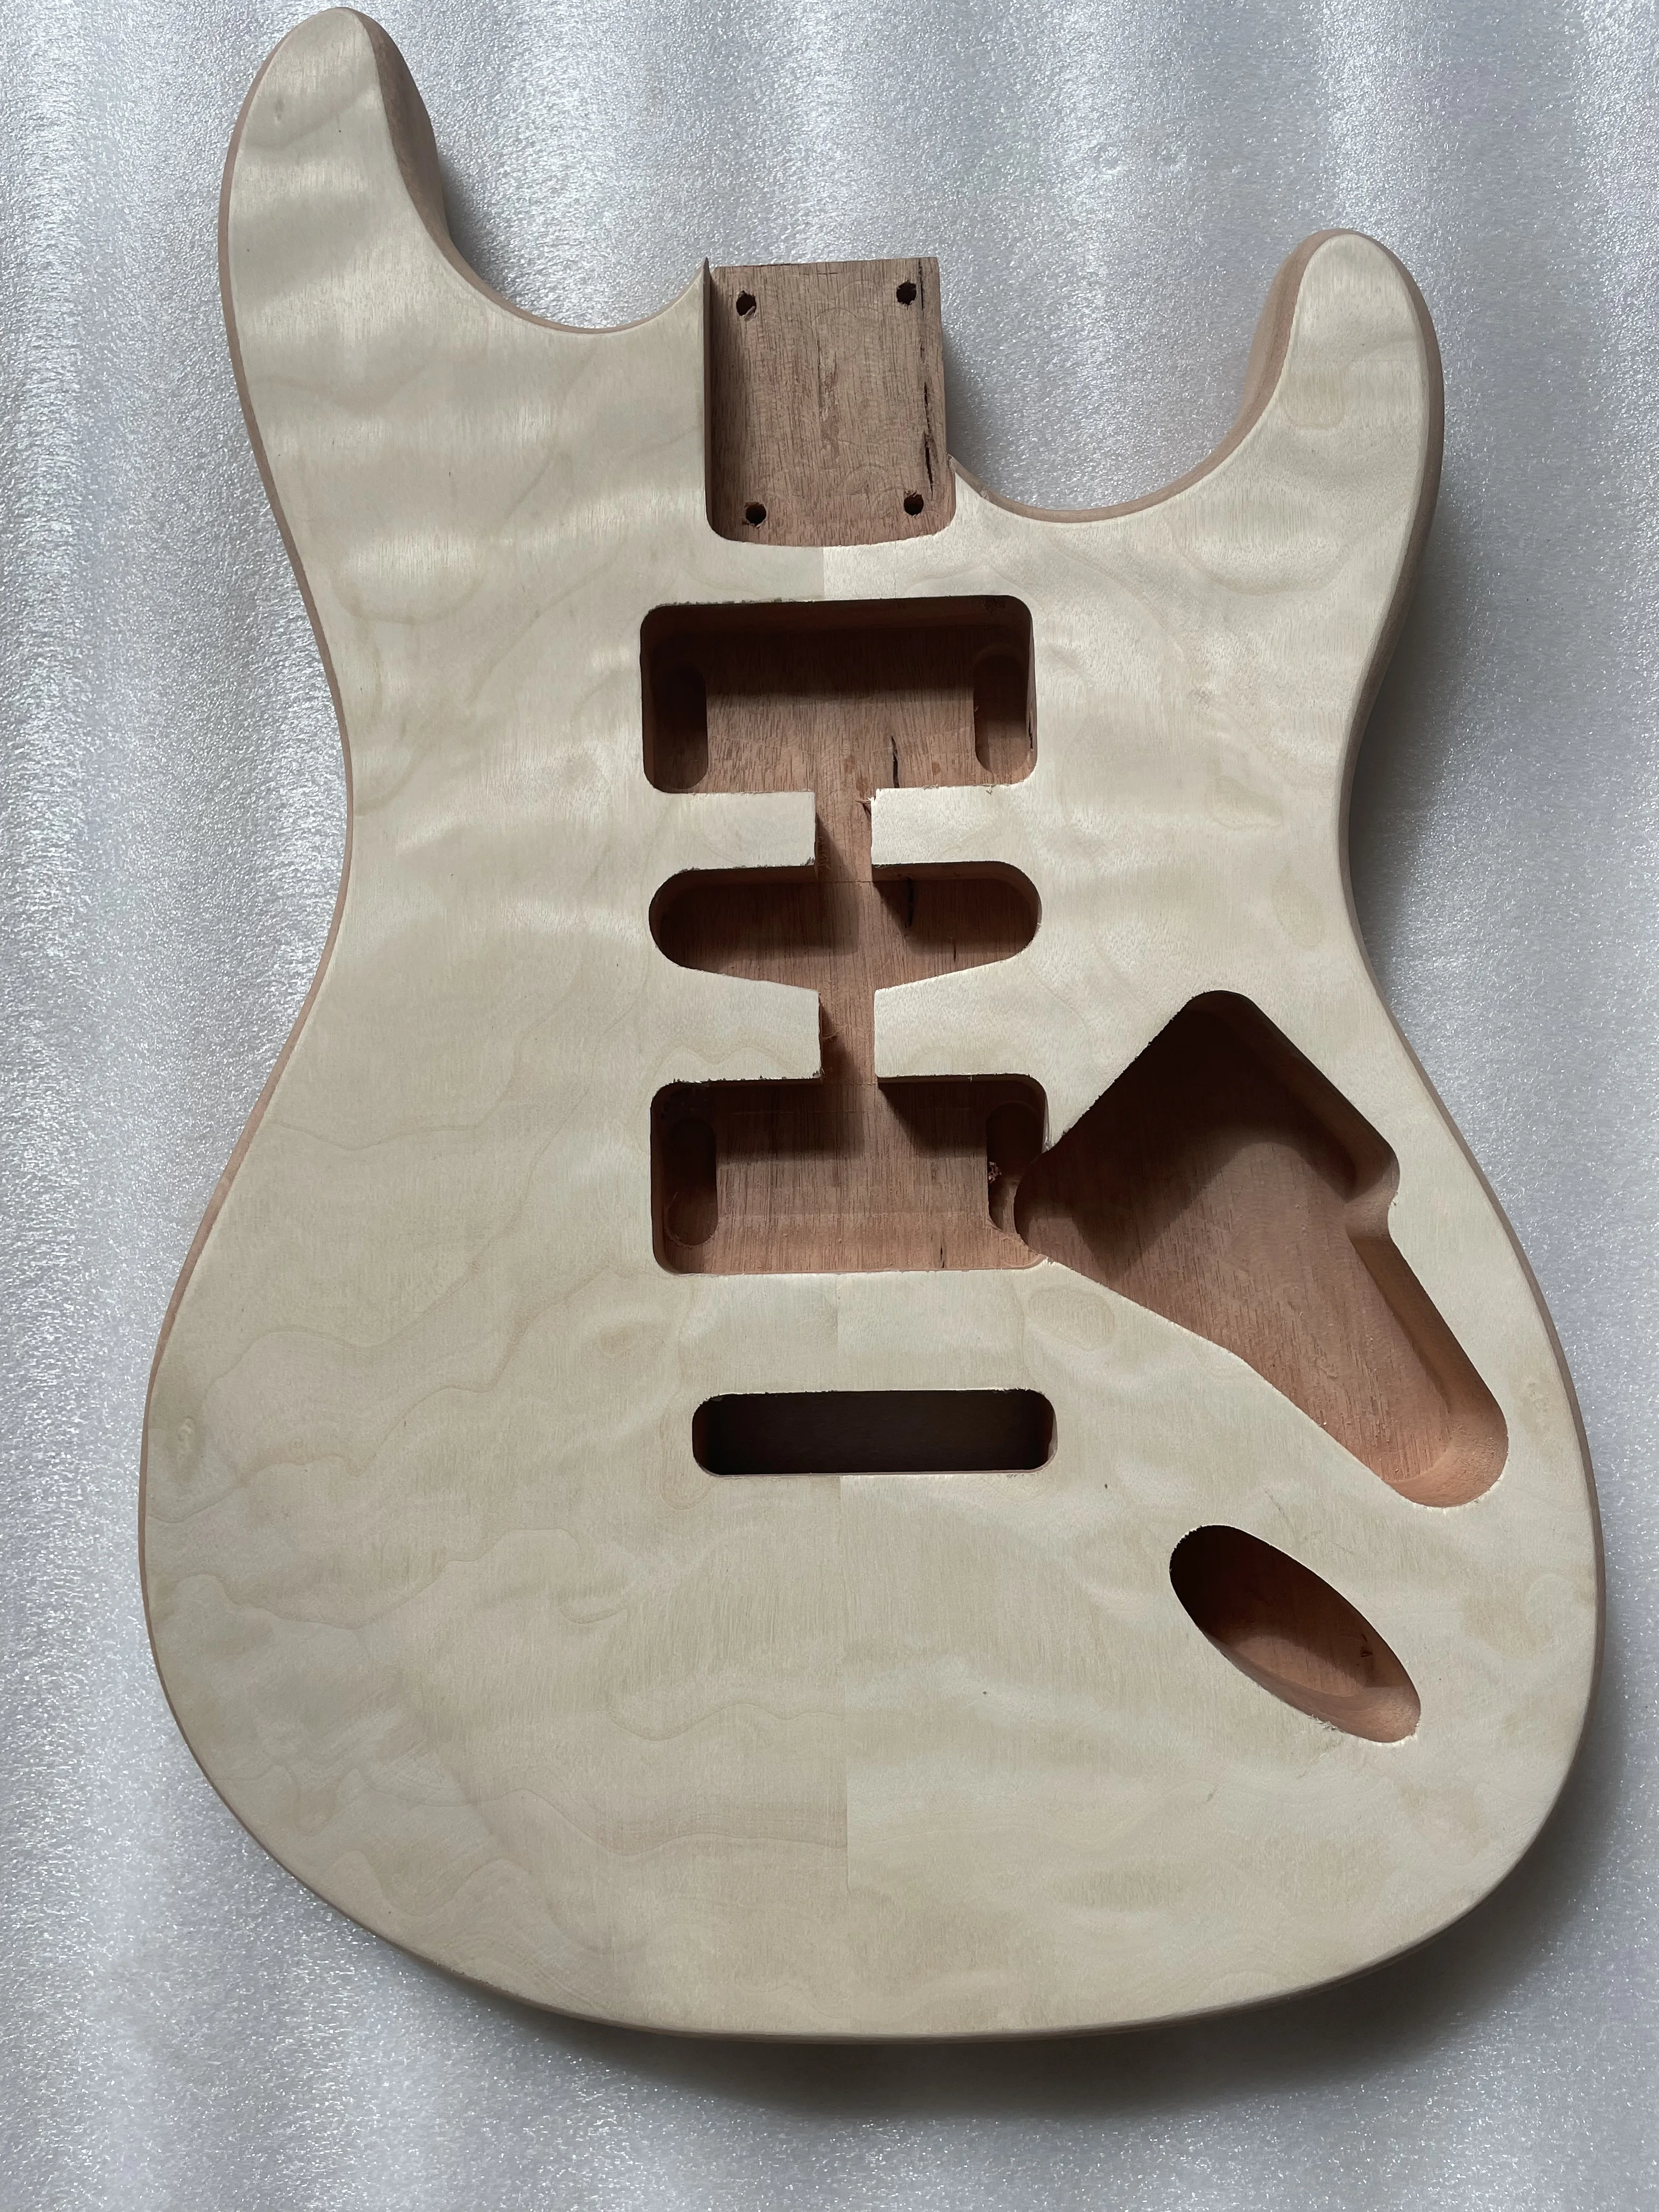 

Unfinished Handcrafted Electric Guitar Body Guitar Barrel Replacement Part Beautiful Maple Veneer 2Piece Mahogany Wood DIY Parts